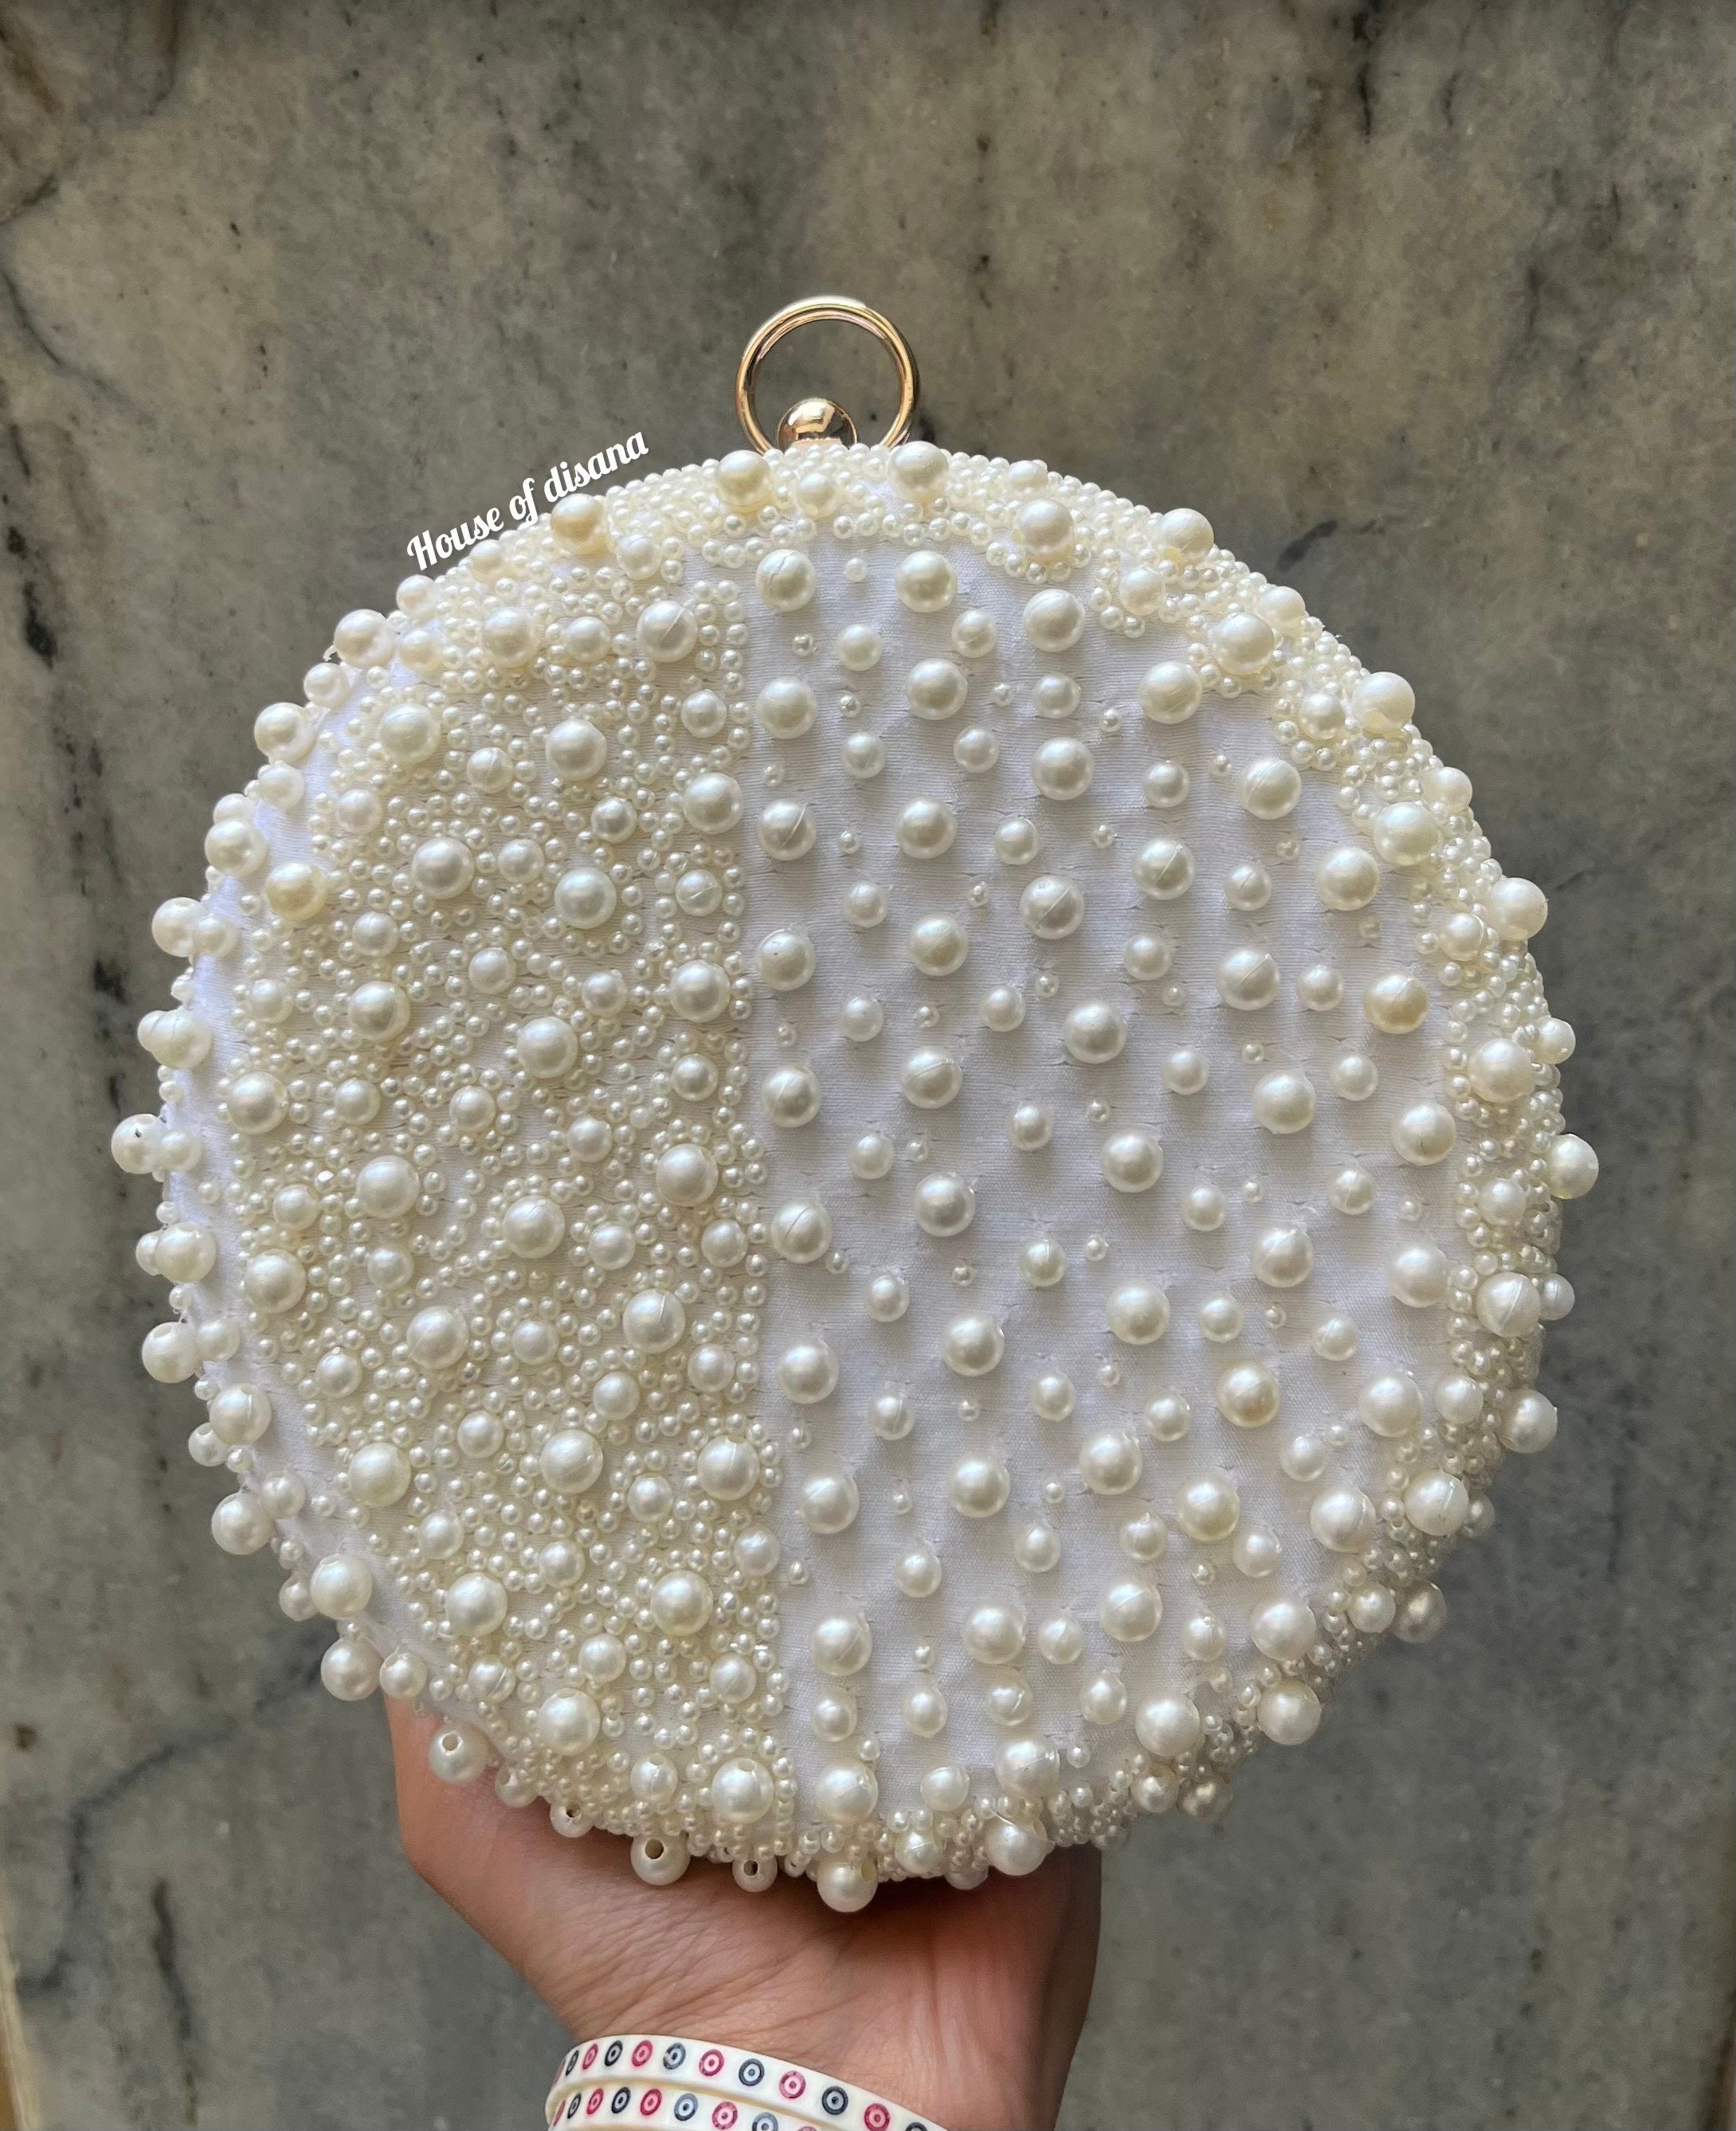 Dropship Round Evening Bag Clutch Ladies Metal Bag Women's Party Handbag  Pearl Decoration to Sell Online at a Lower Price | Doba